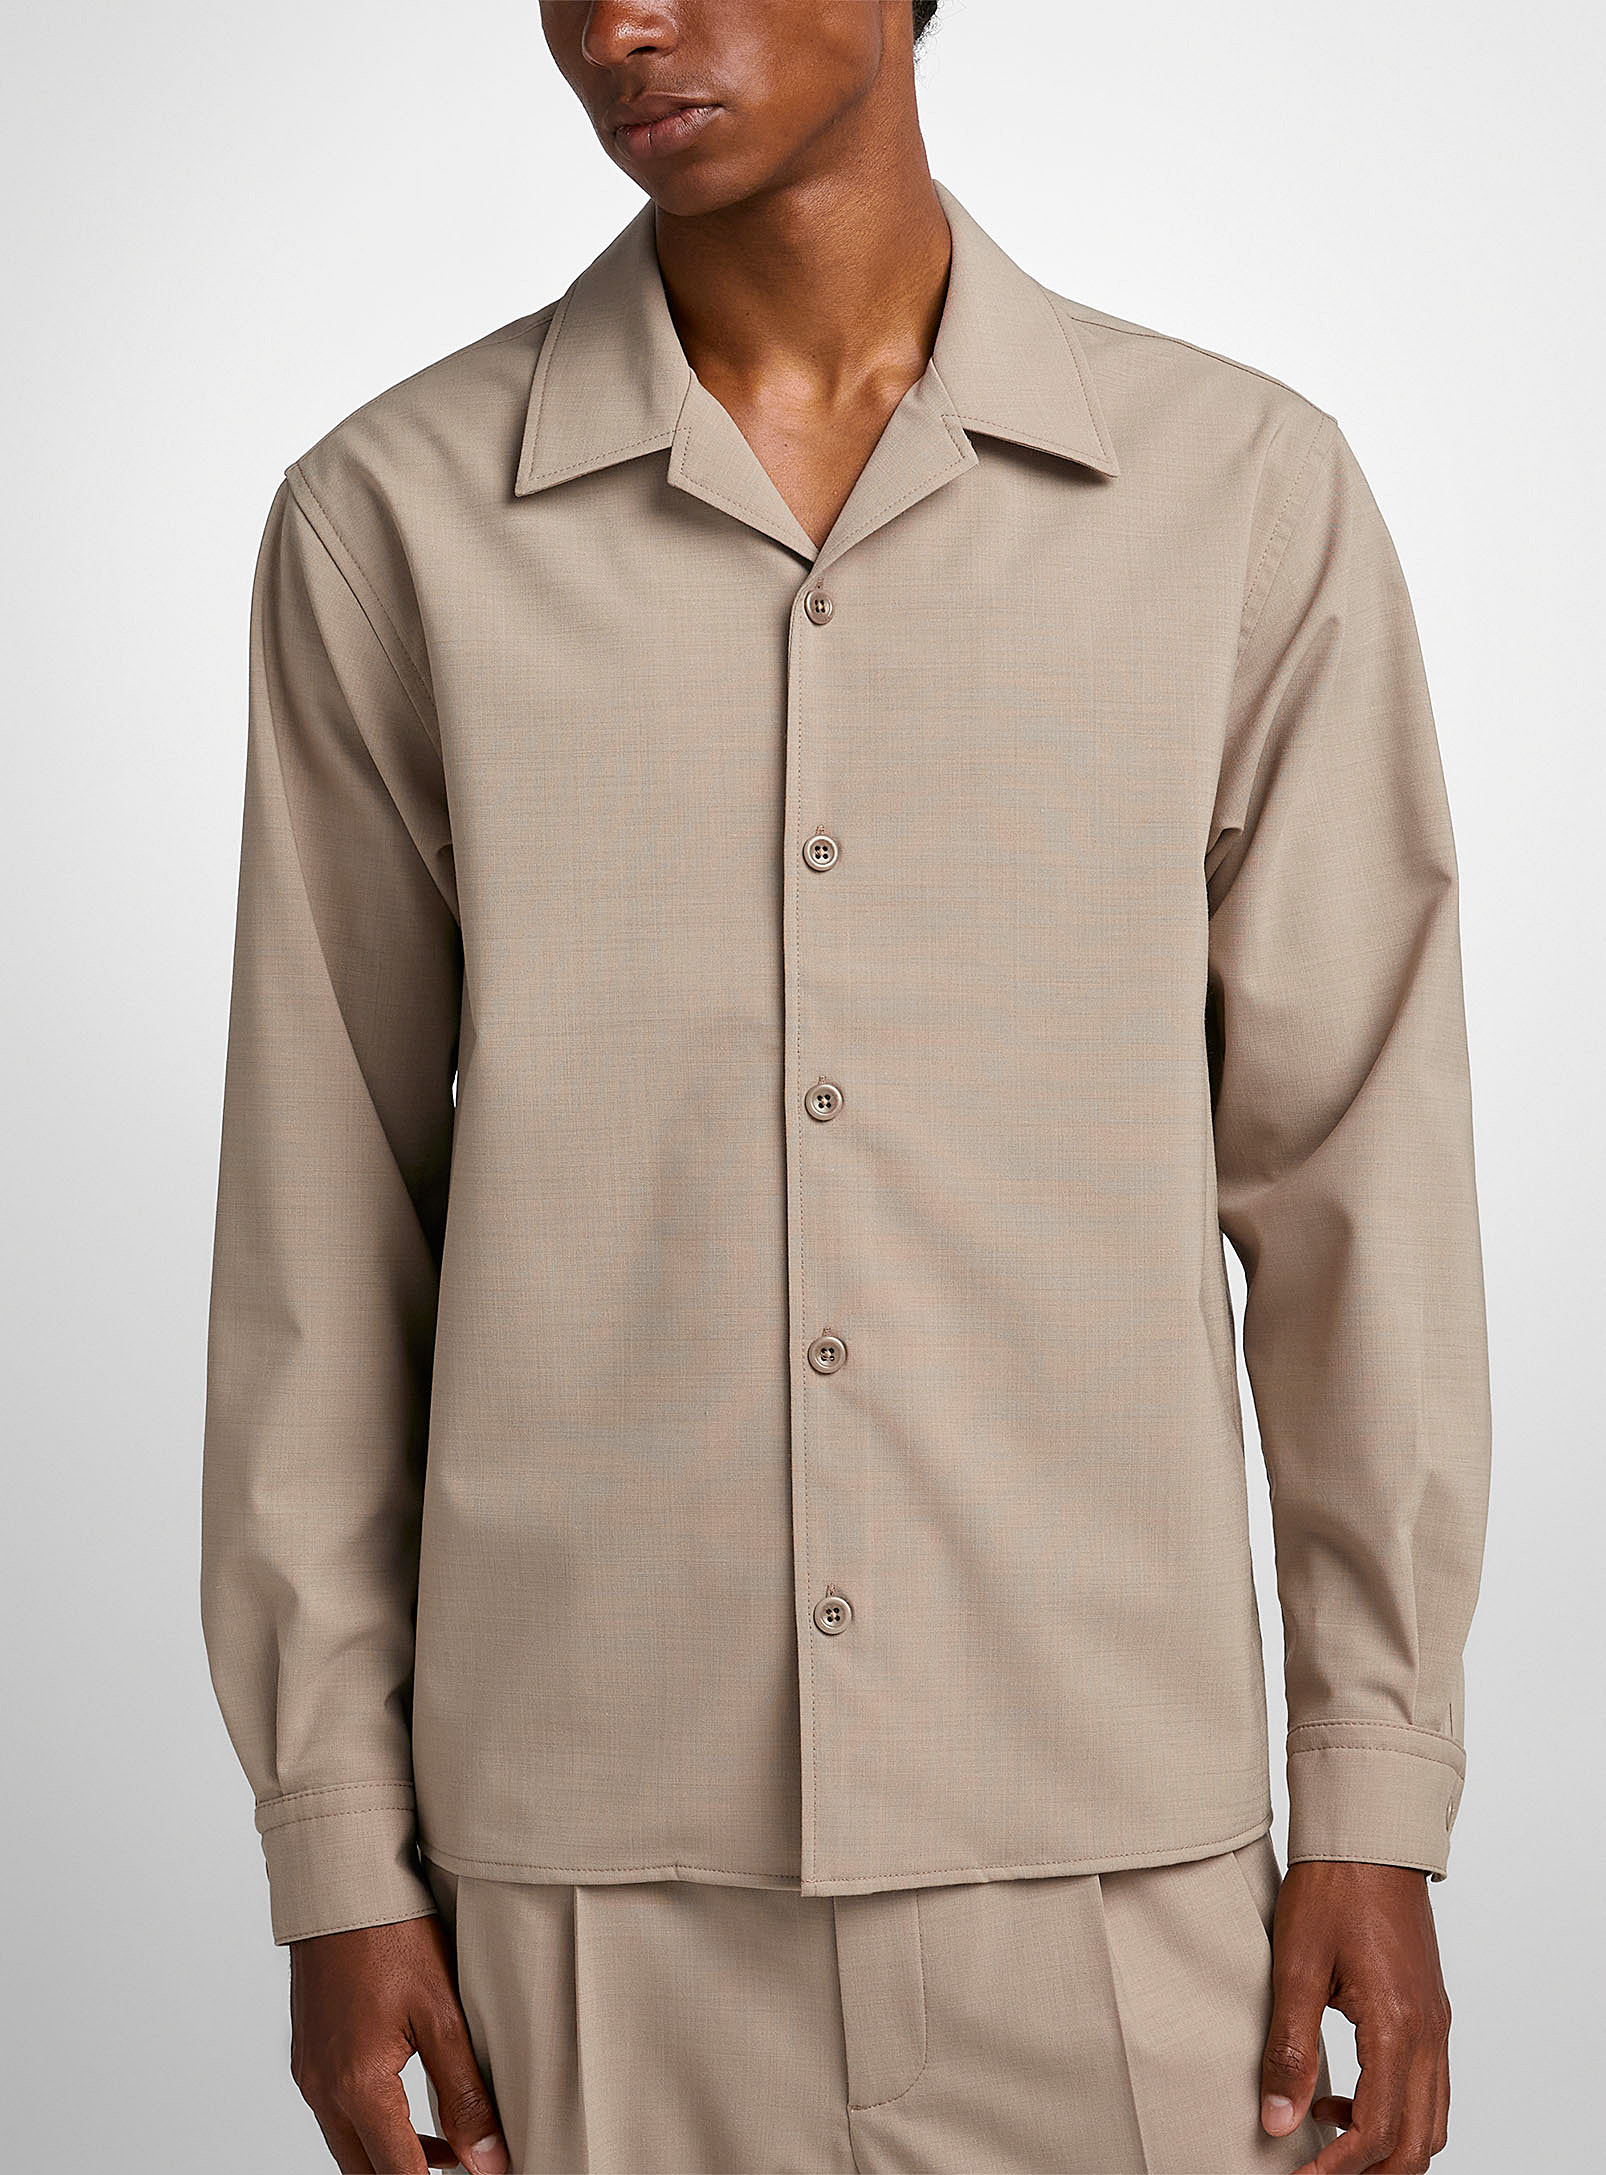 Norse Projects - Men's Carsten shirt